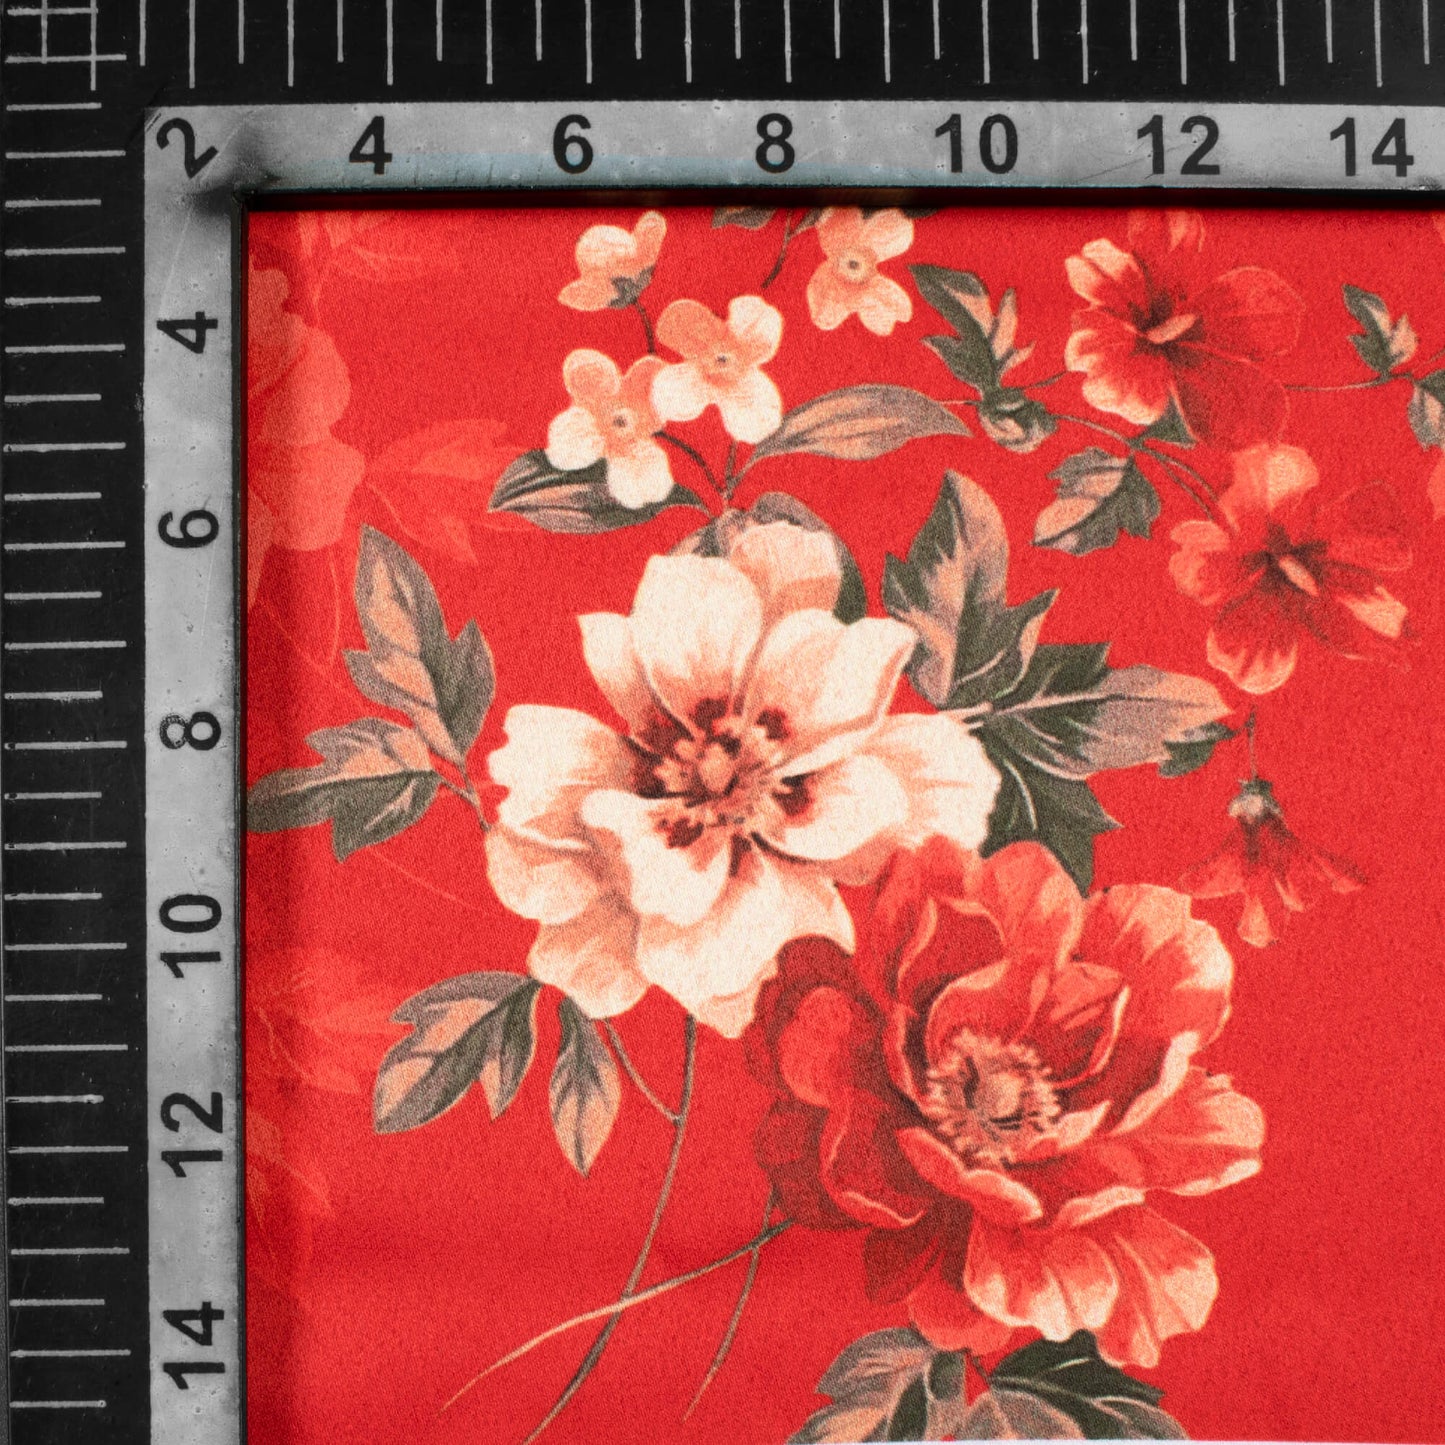 Sangria Red Floral Pattern Digital Print Charmeuse Satin Fabric (Width 58 Inches)